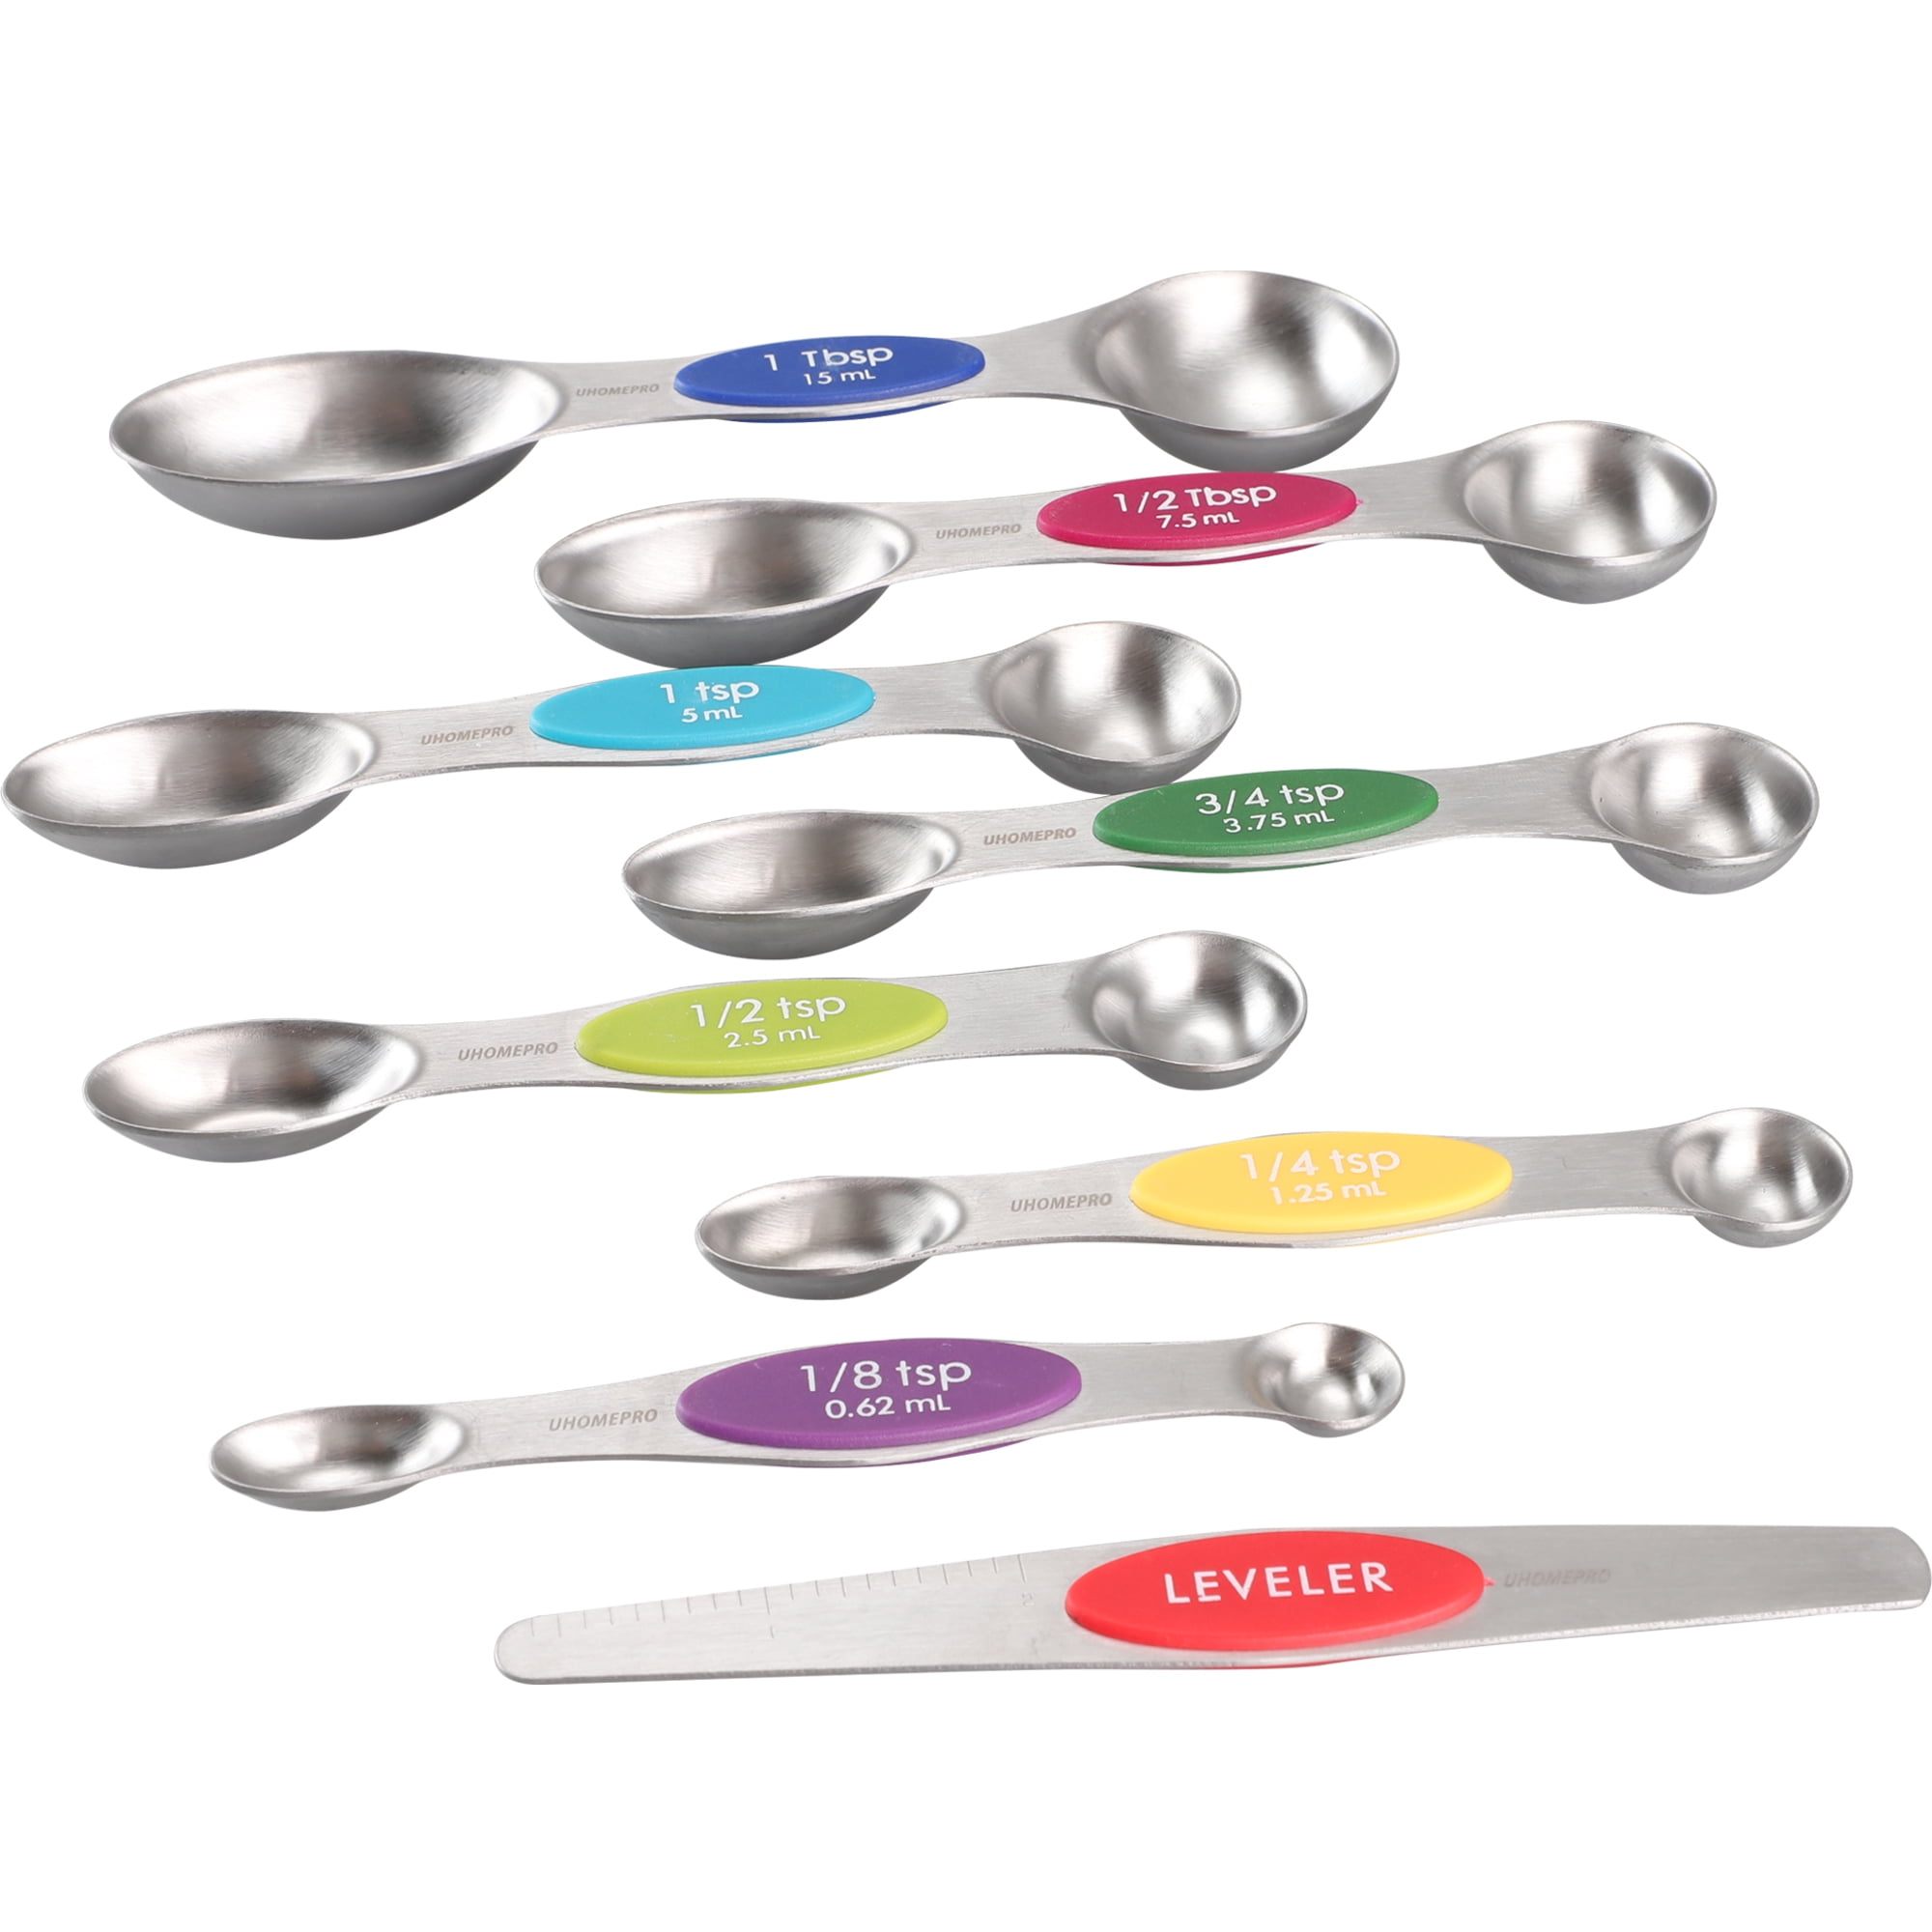 8 Pieces Measuring Cups Magnetic Spoons Set Stainless Steel Kitchen Utensils New